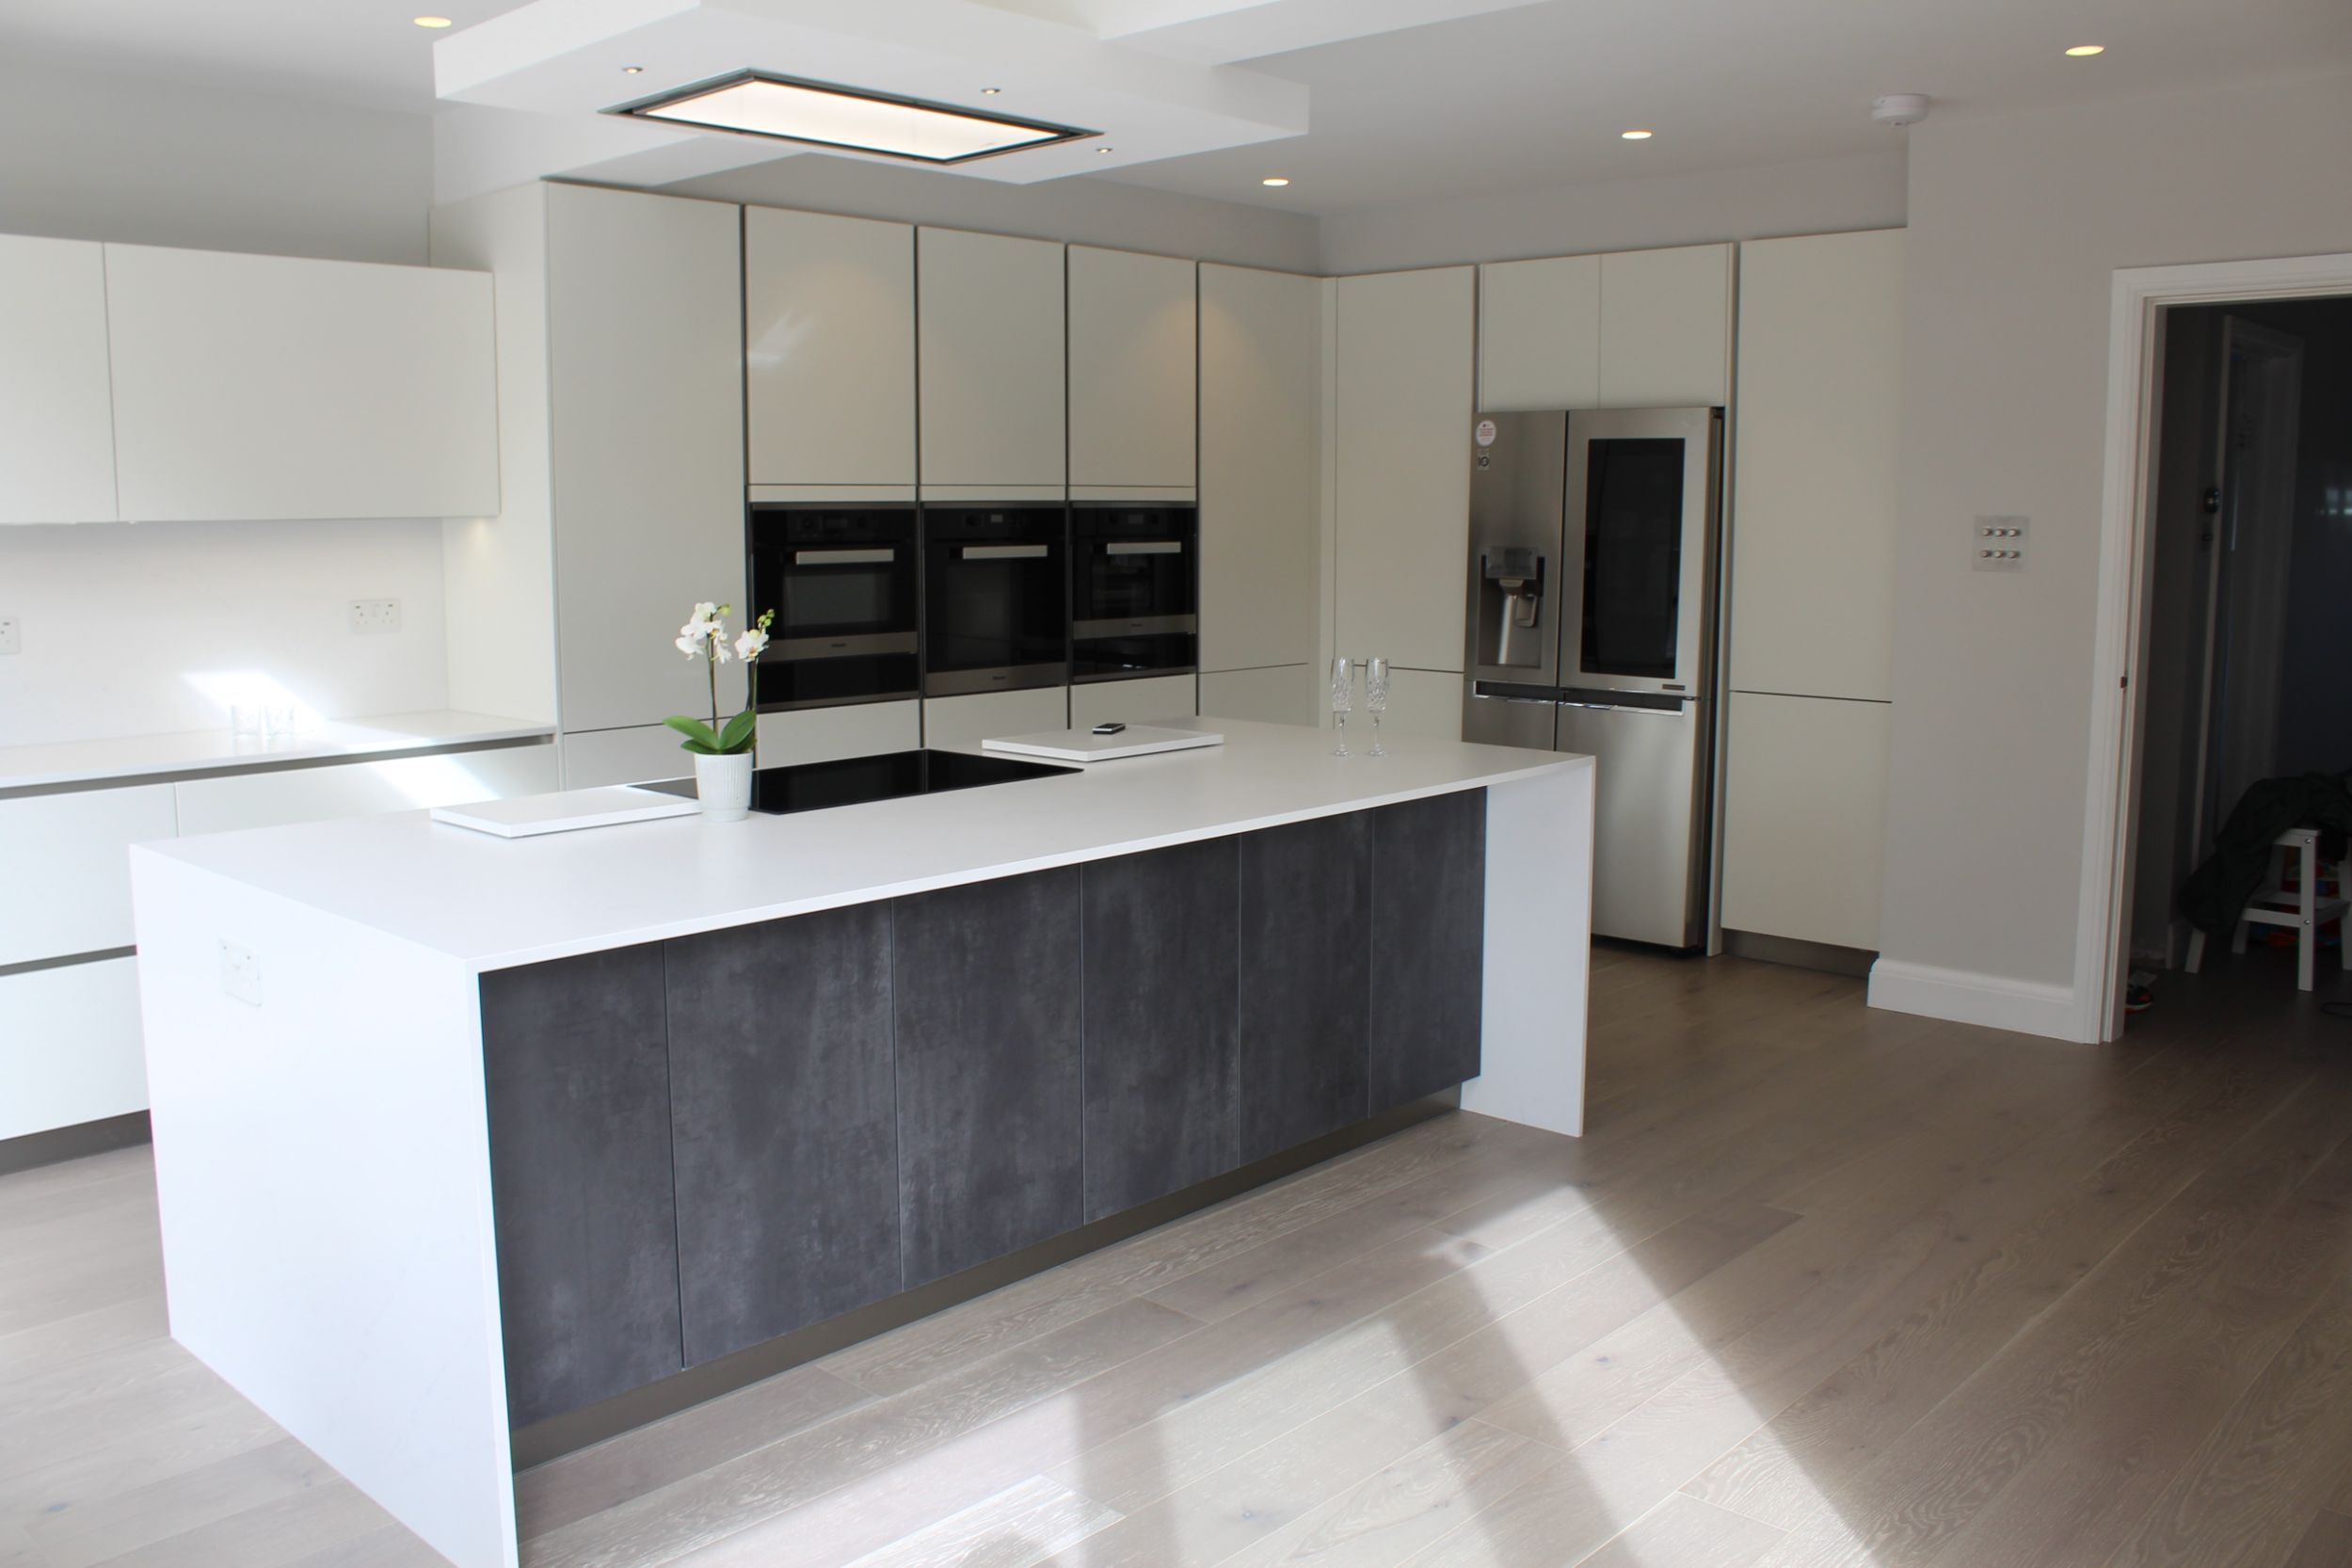 German-made kitchen in Finchley designed, supplied and installed by Hampdens KB